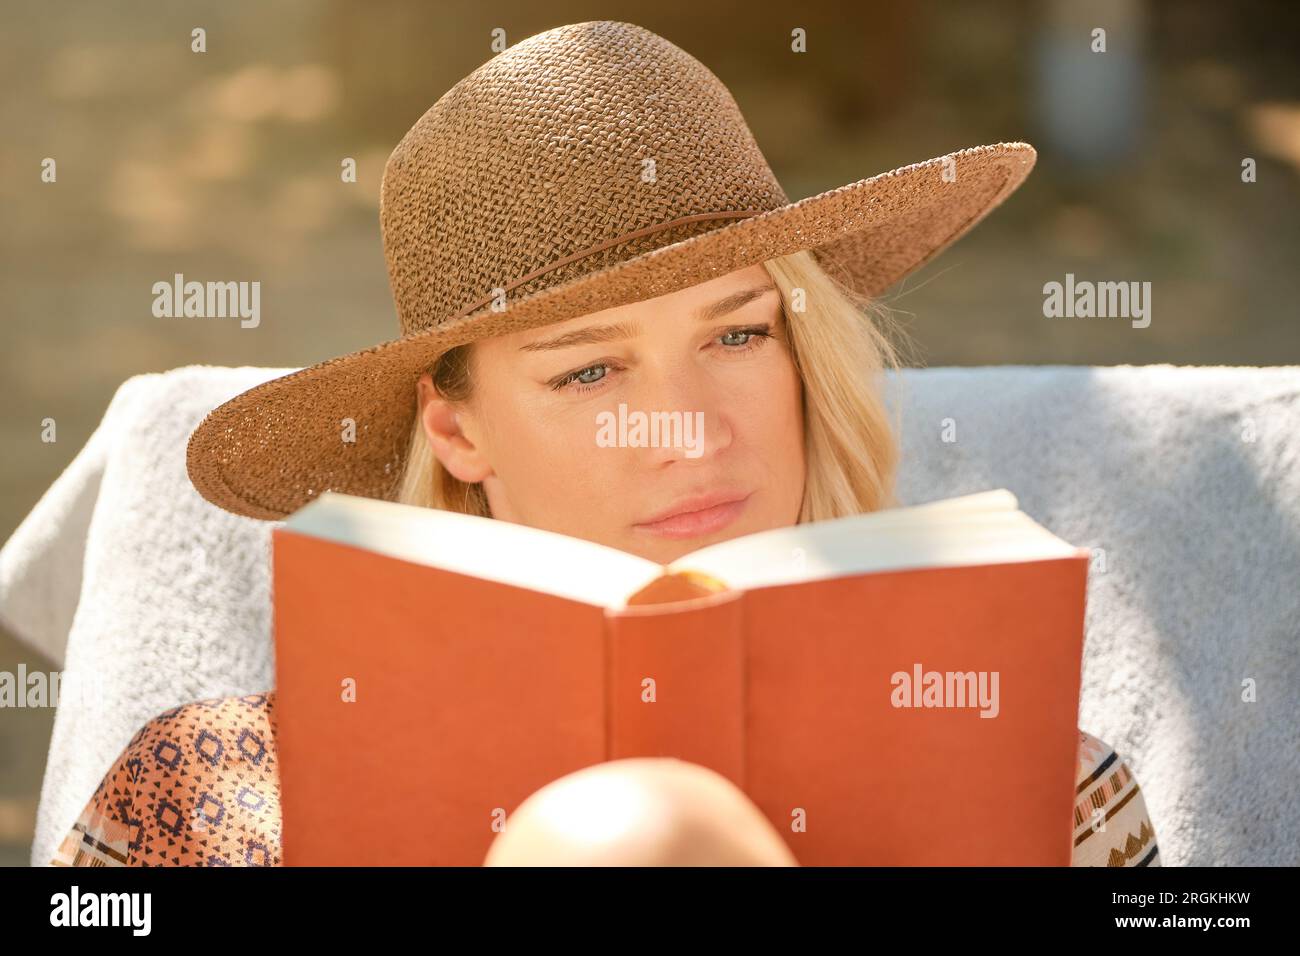 Pensive young female in straw hat and jacket looking at red bounded book while reading with concentration and sitting on white mattress on deckchair Stock Photo